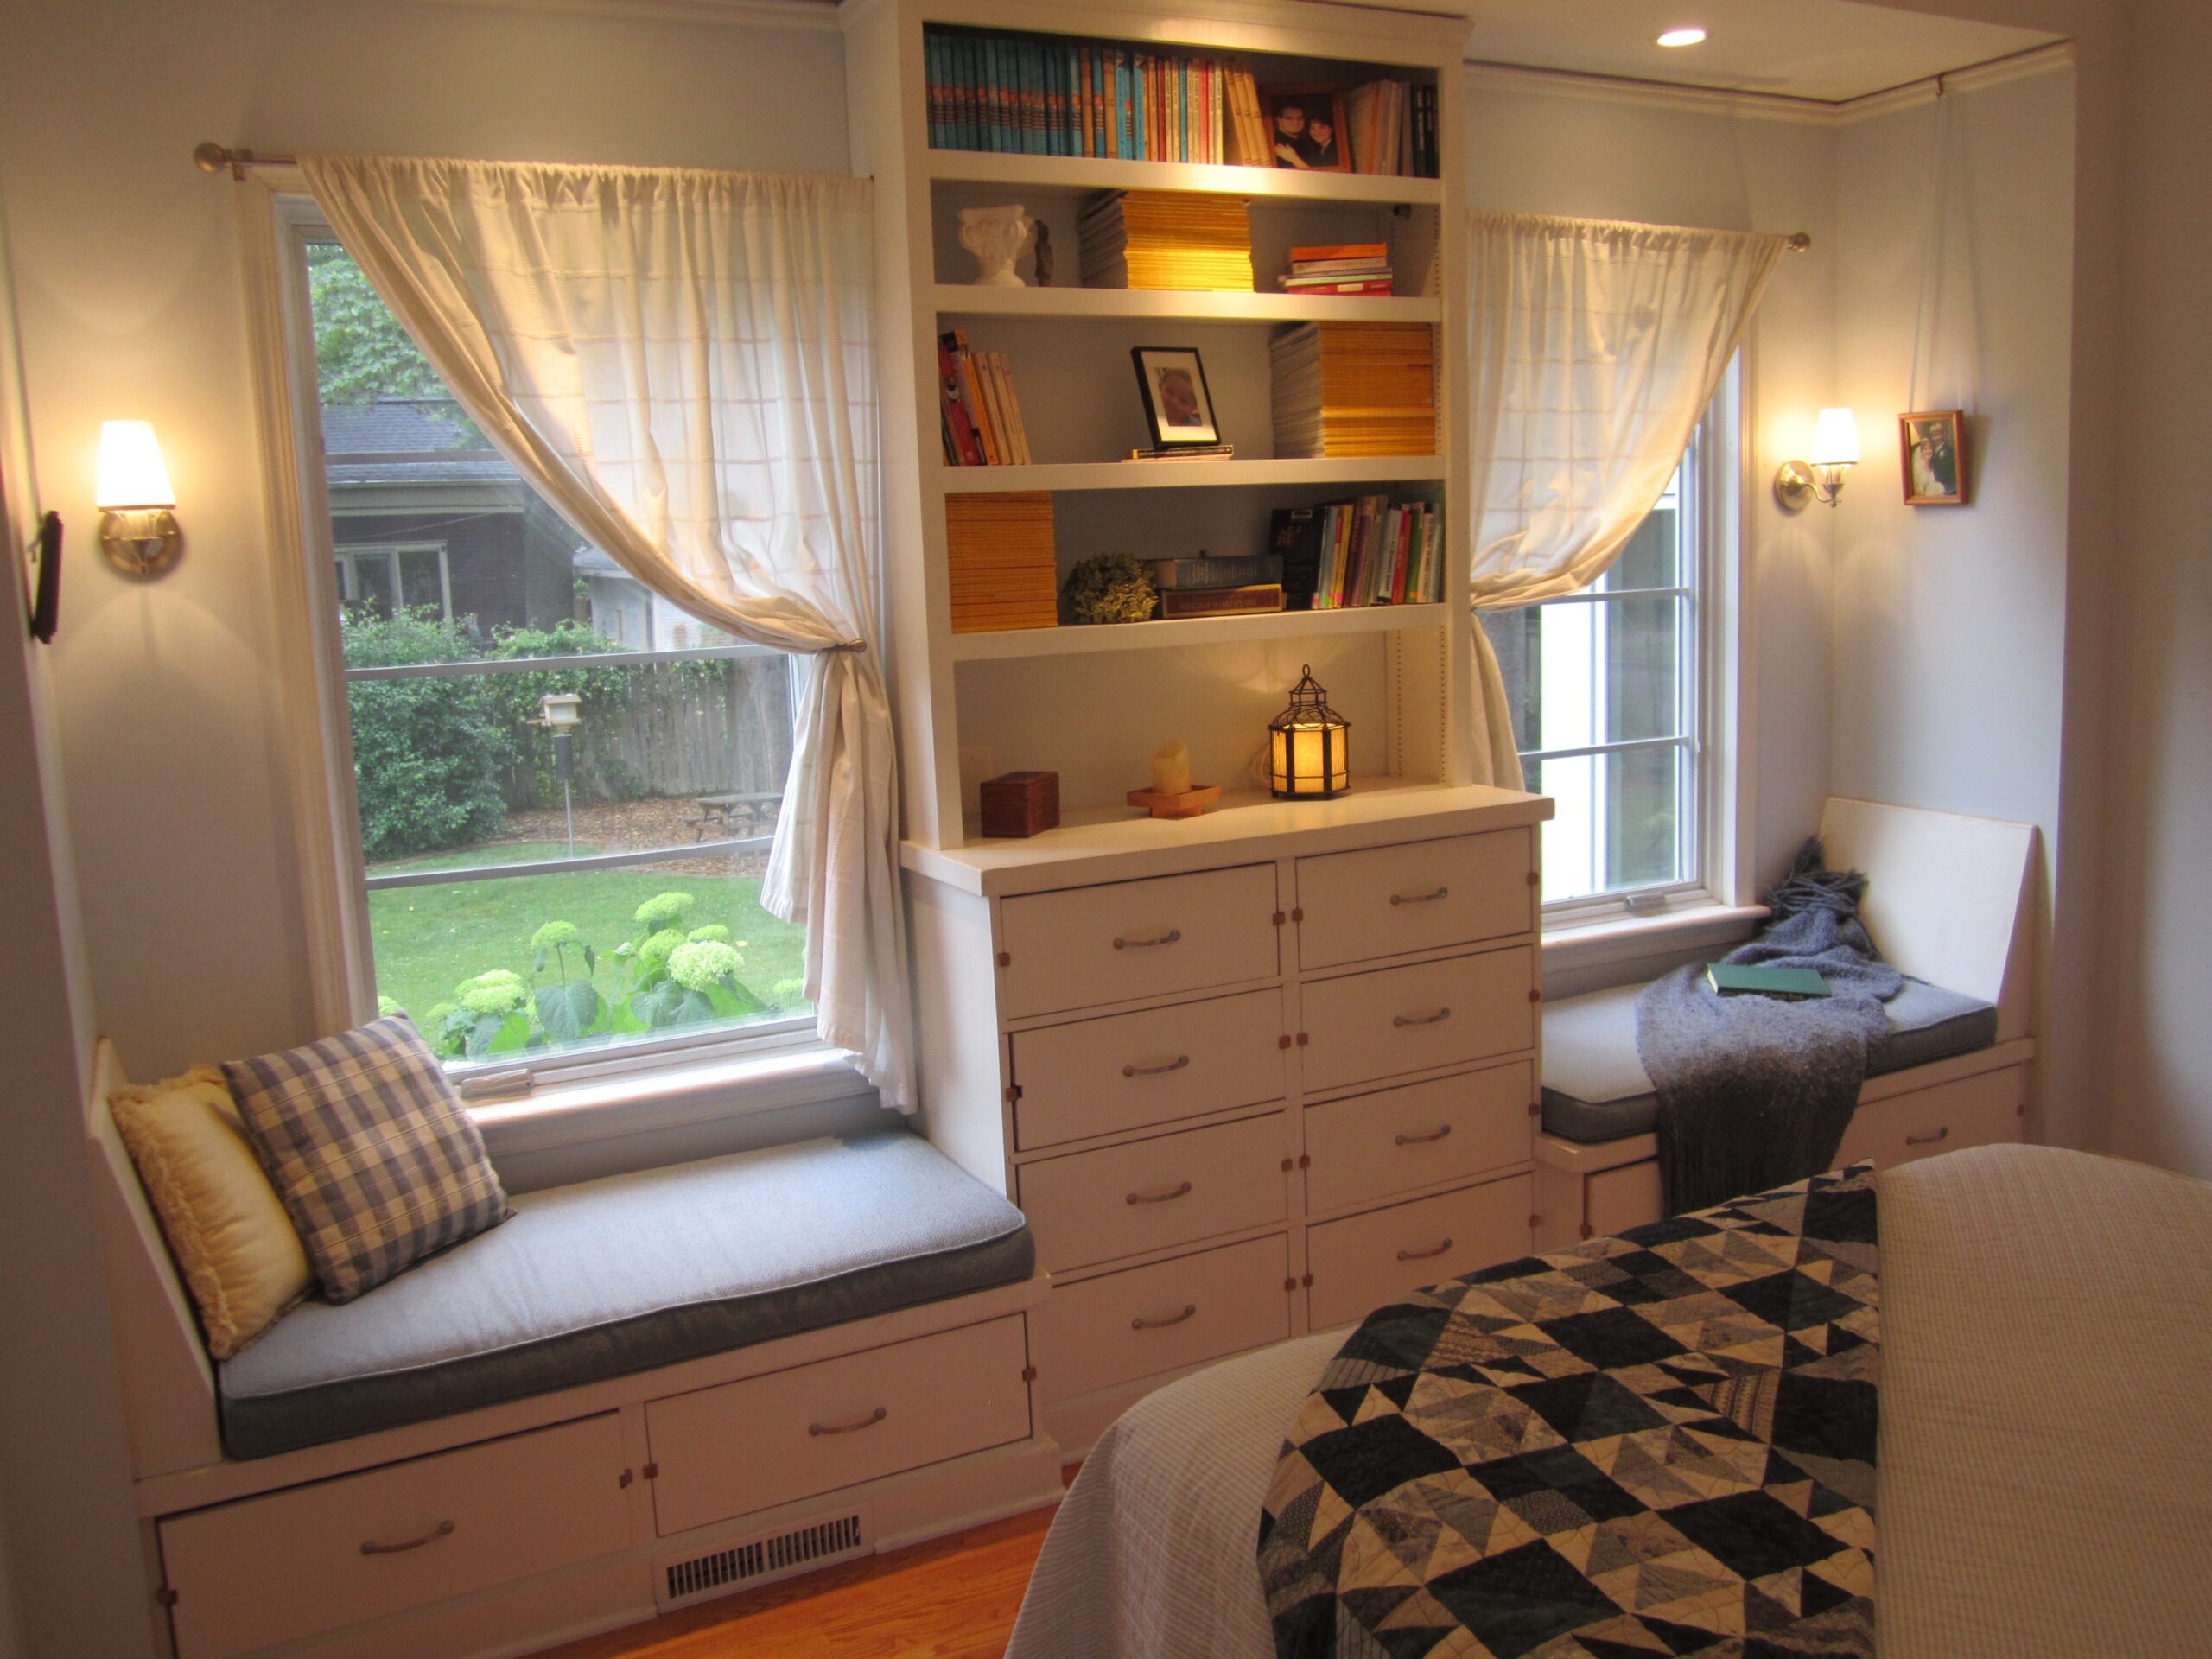 A photograph of a white bedroom with two windows and a bookshelf between the windows. The nooks by the windows are lit by wall sconces